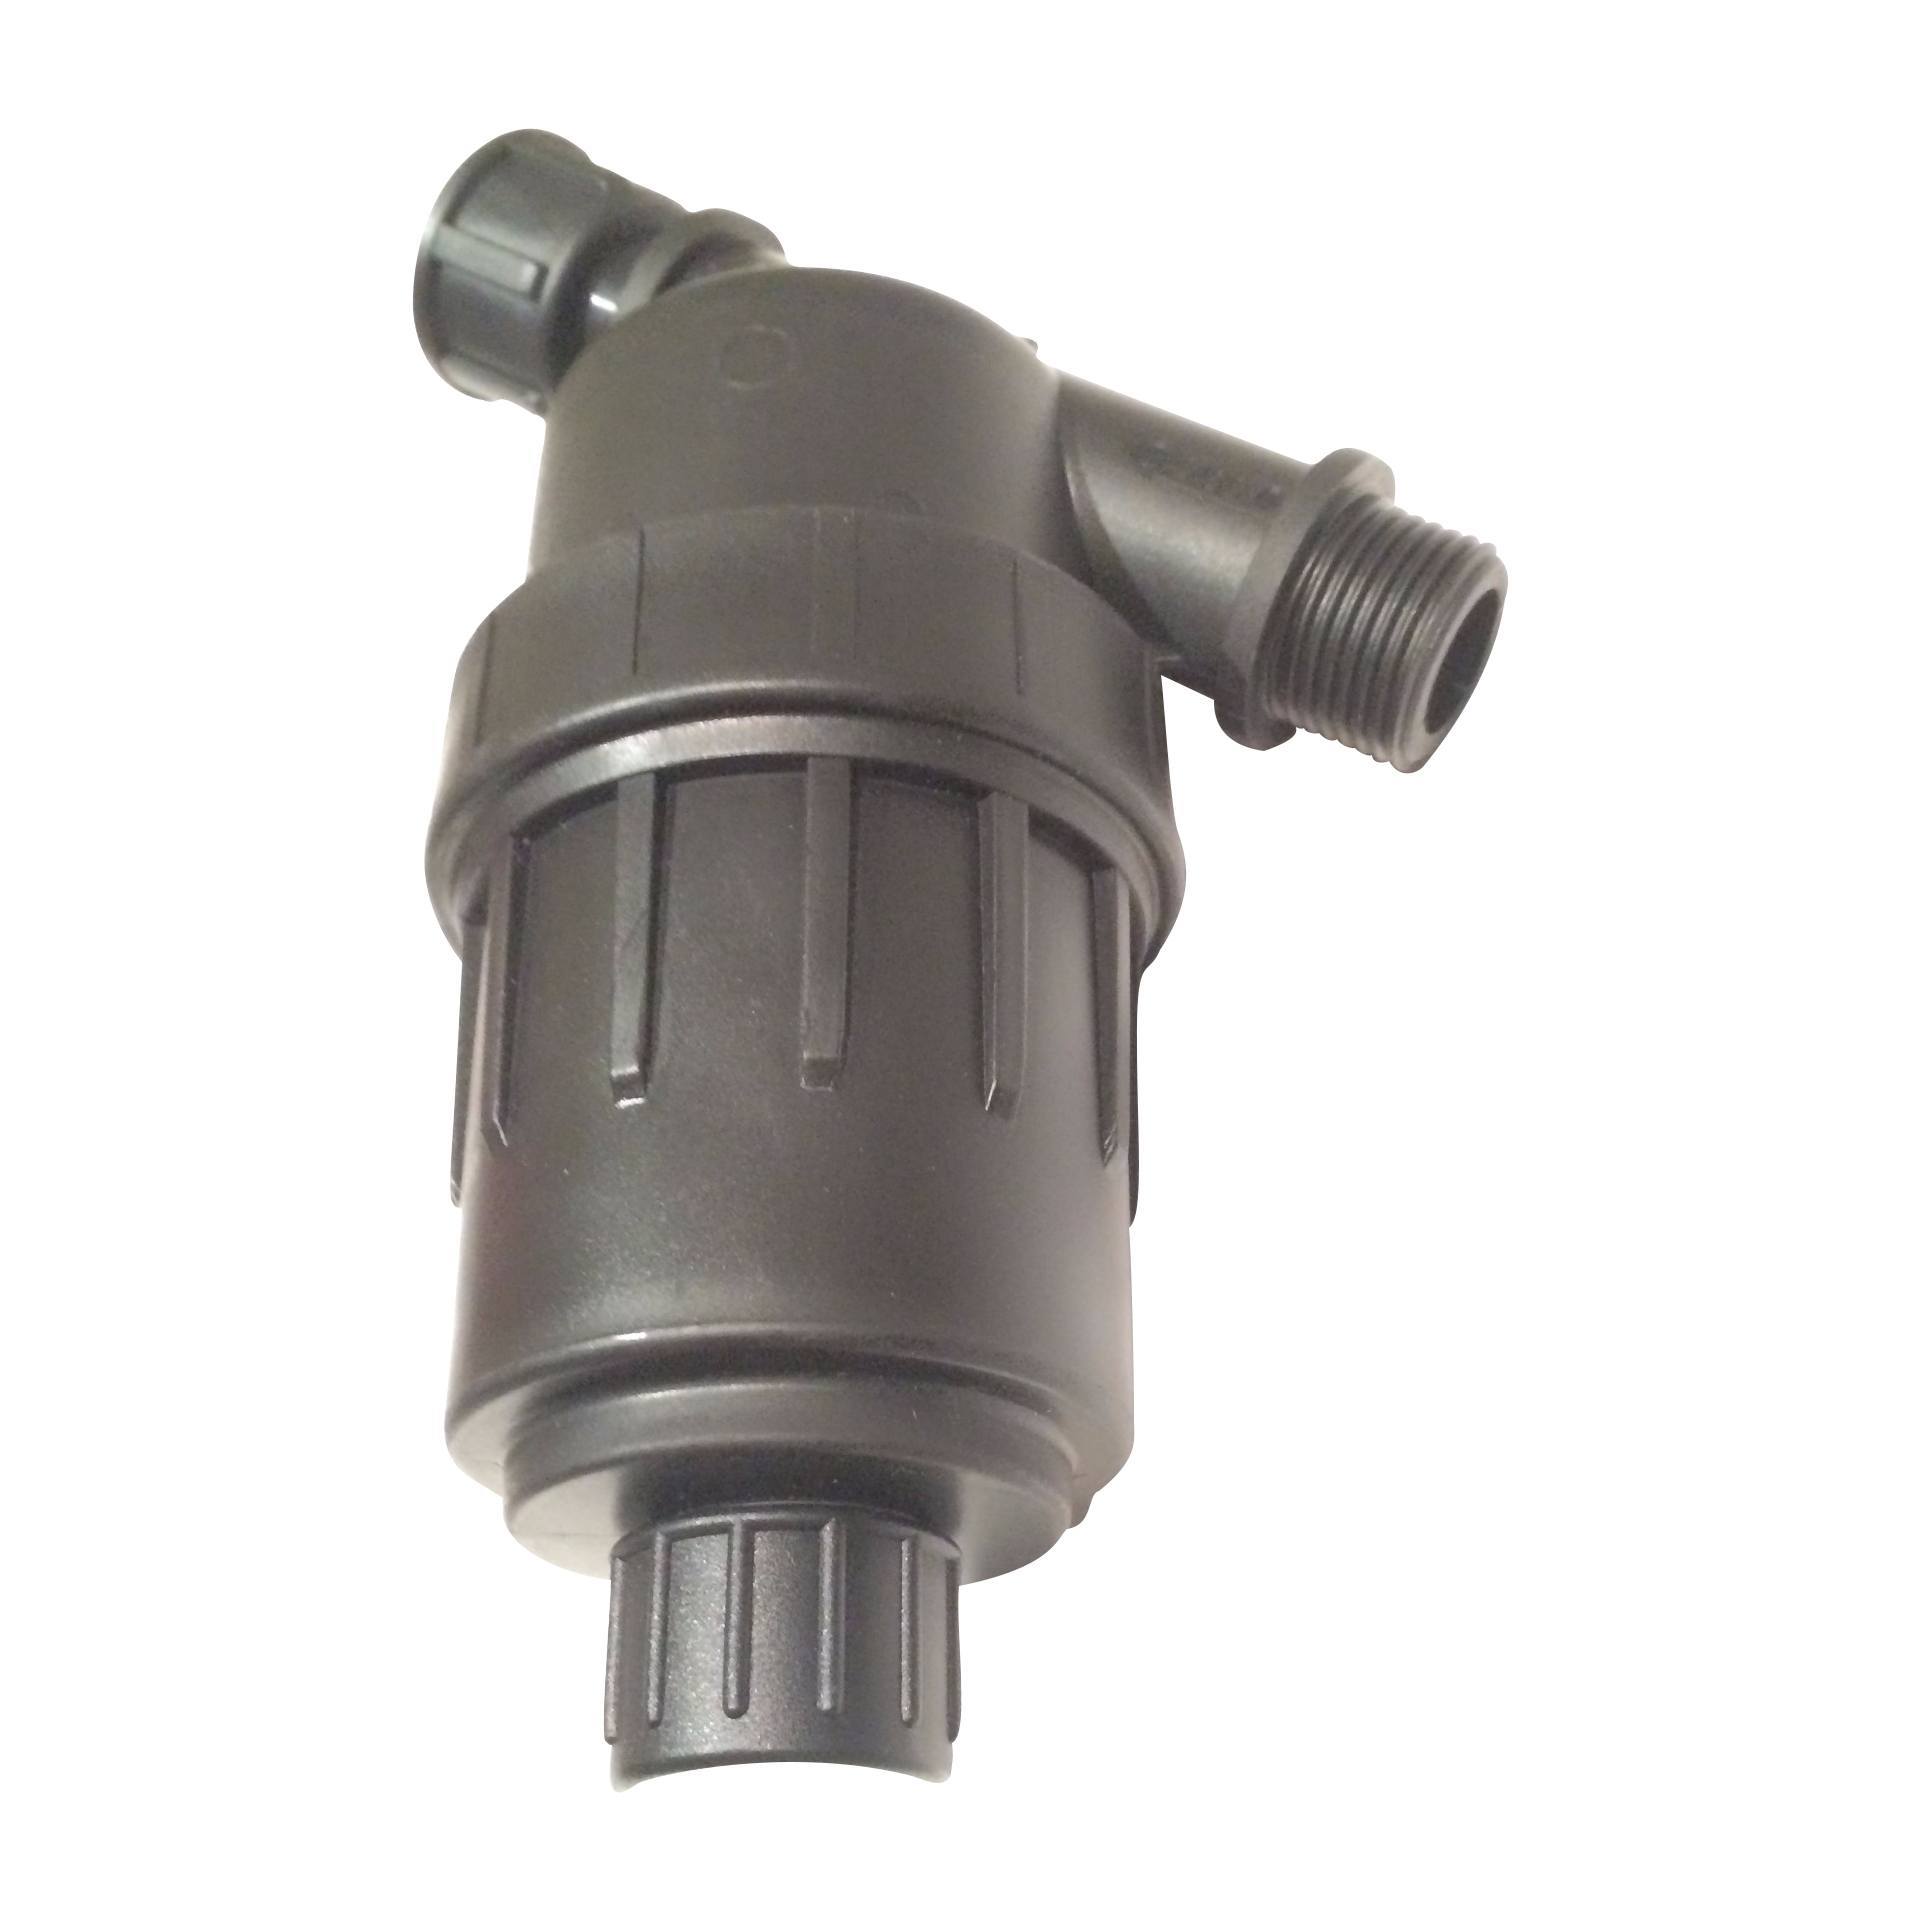 Connectors And Accessories - High-Volume Water Filter With Hose Fittings